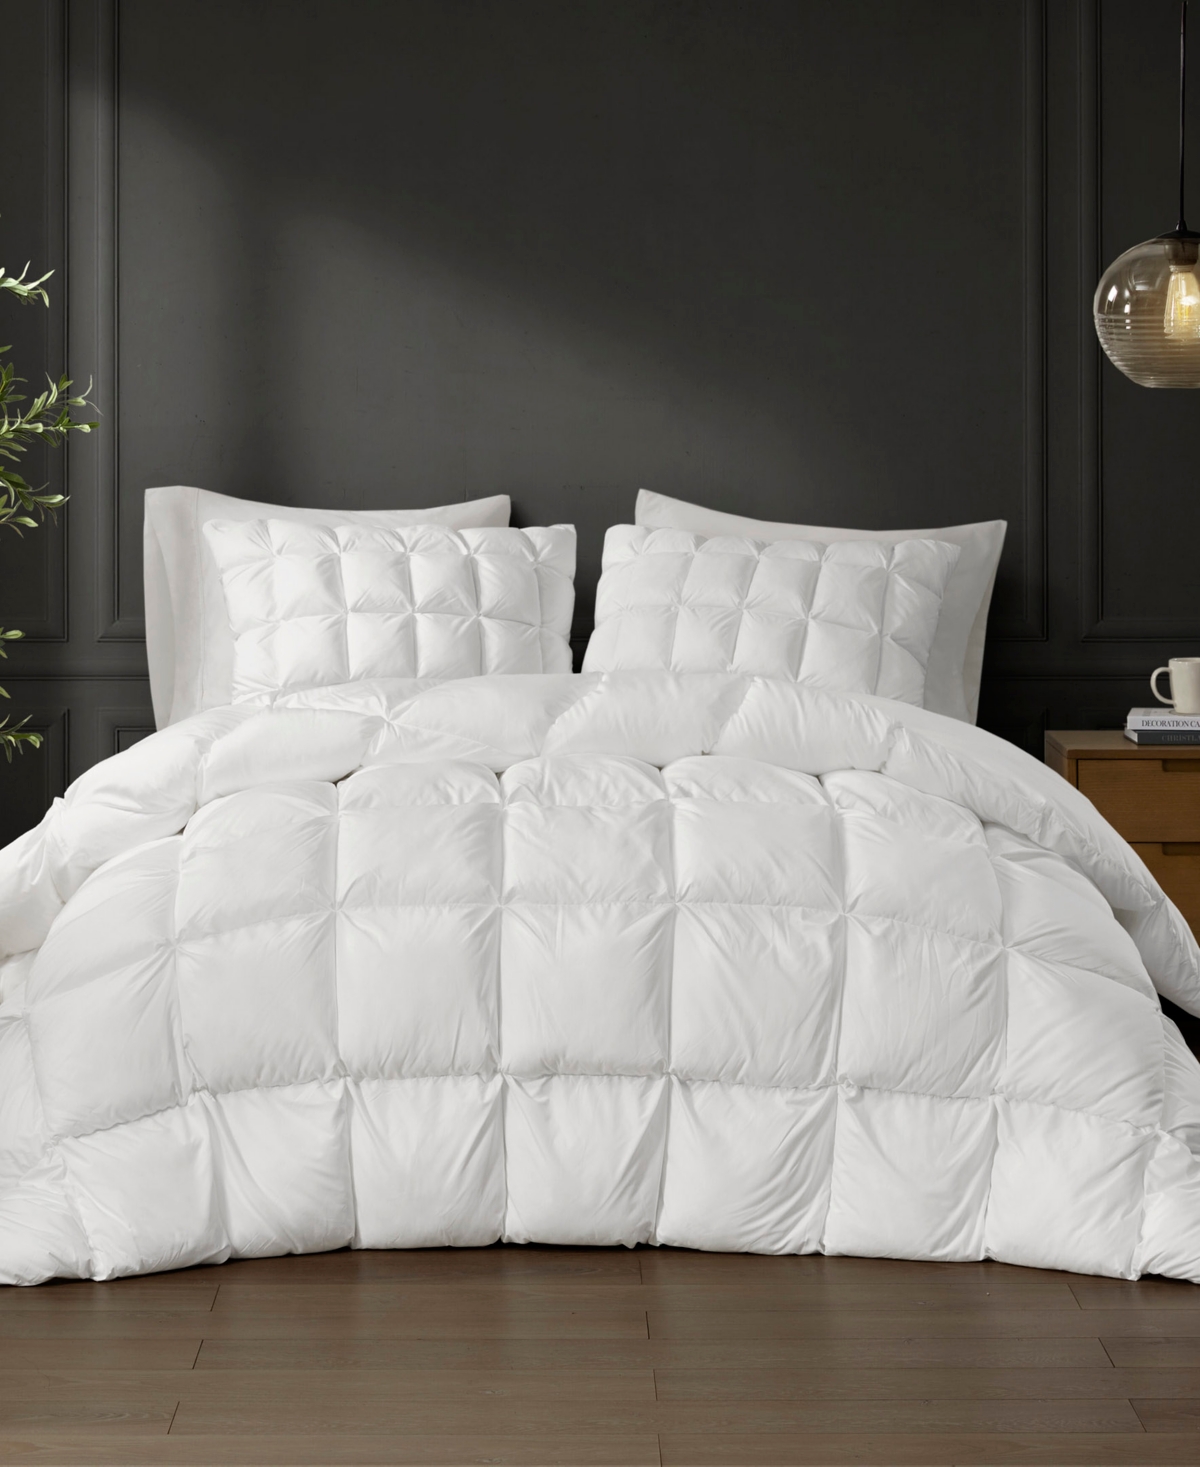 Madison Park Stay Puffed Overfilled Down Alternative Comforter, King/california King In White